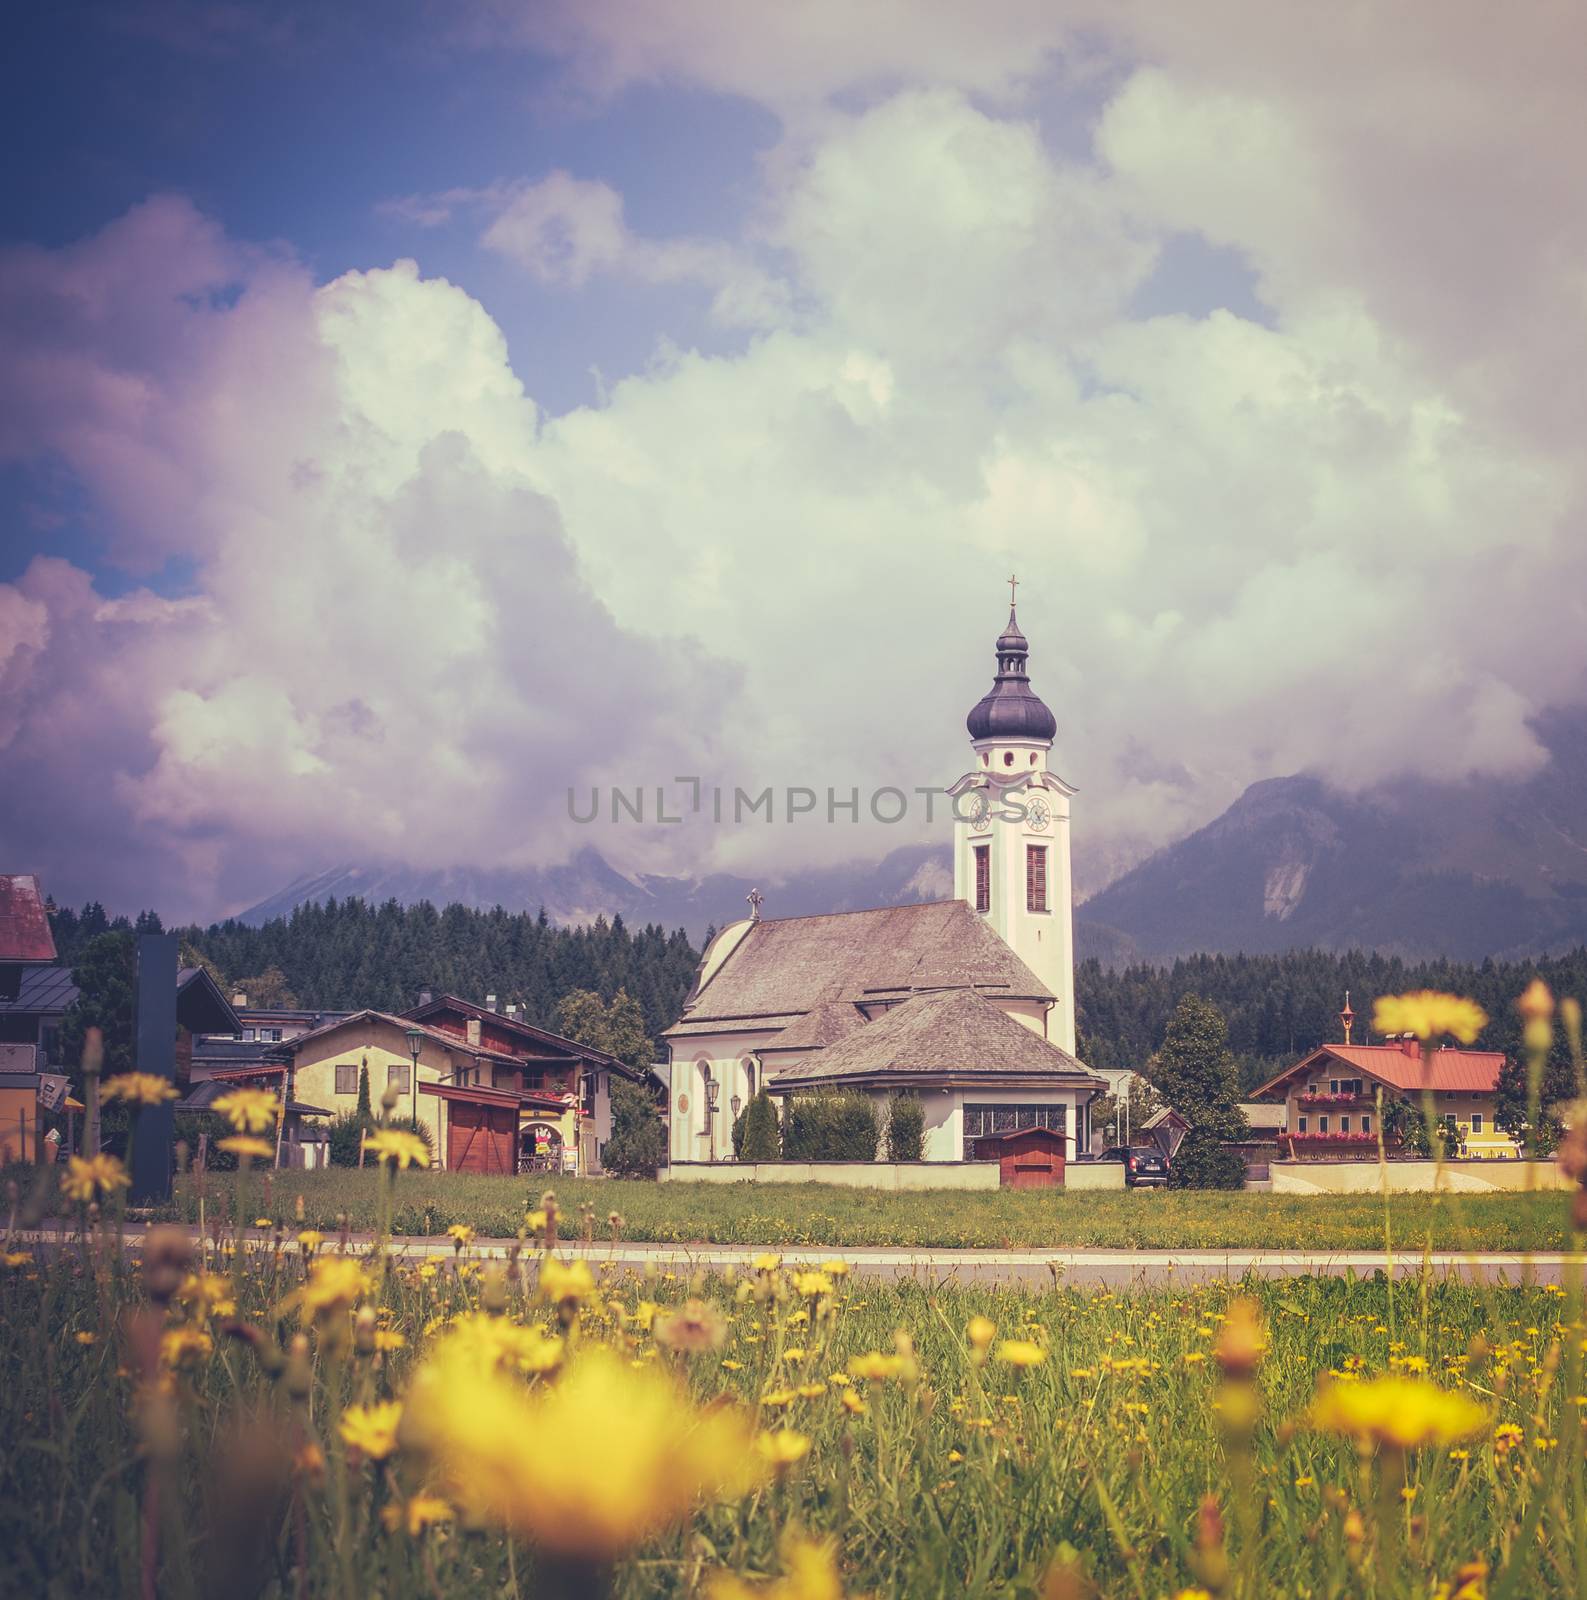 Retro Style VIntage Photo Of An Alpine Village And Meadow